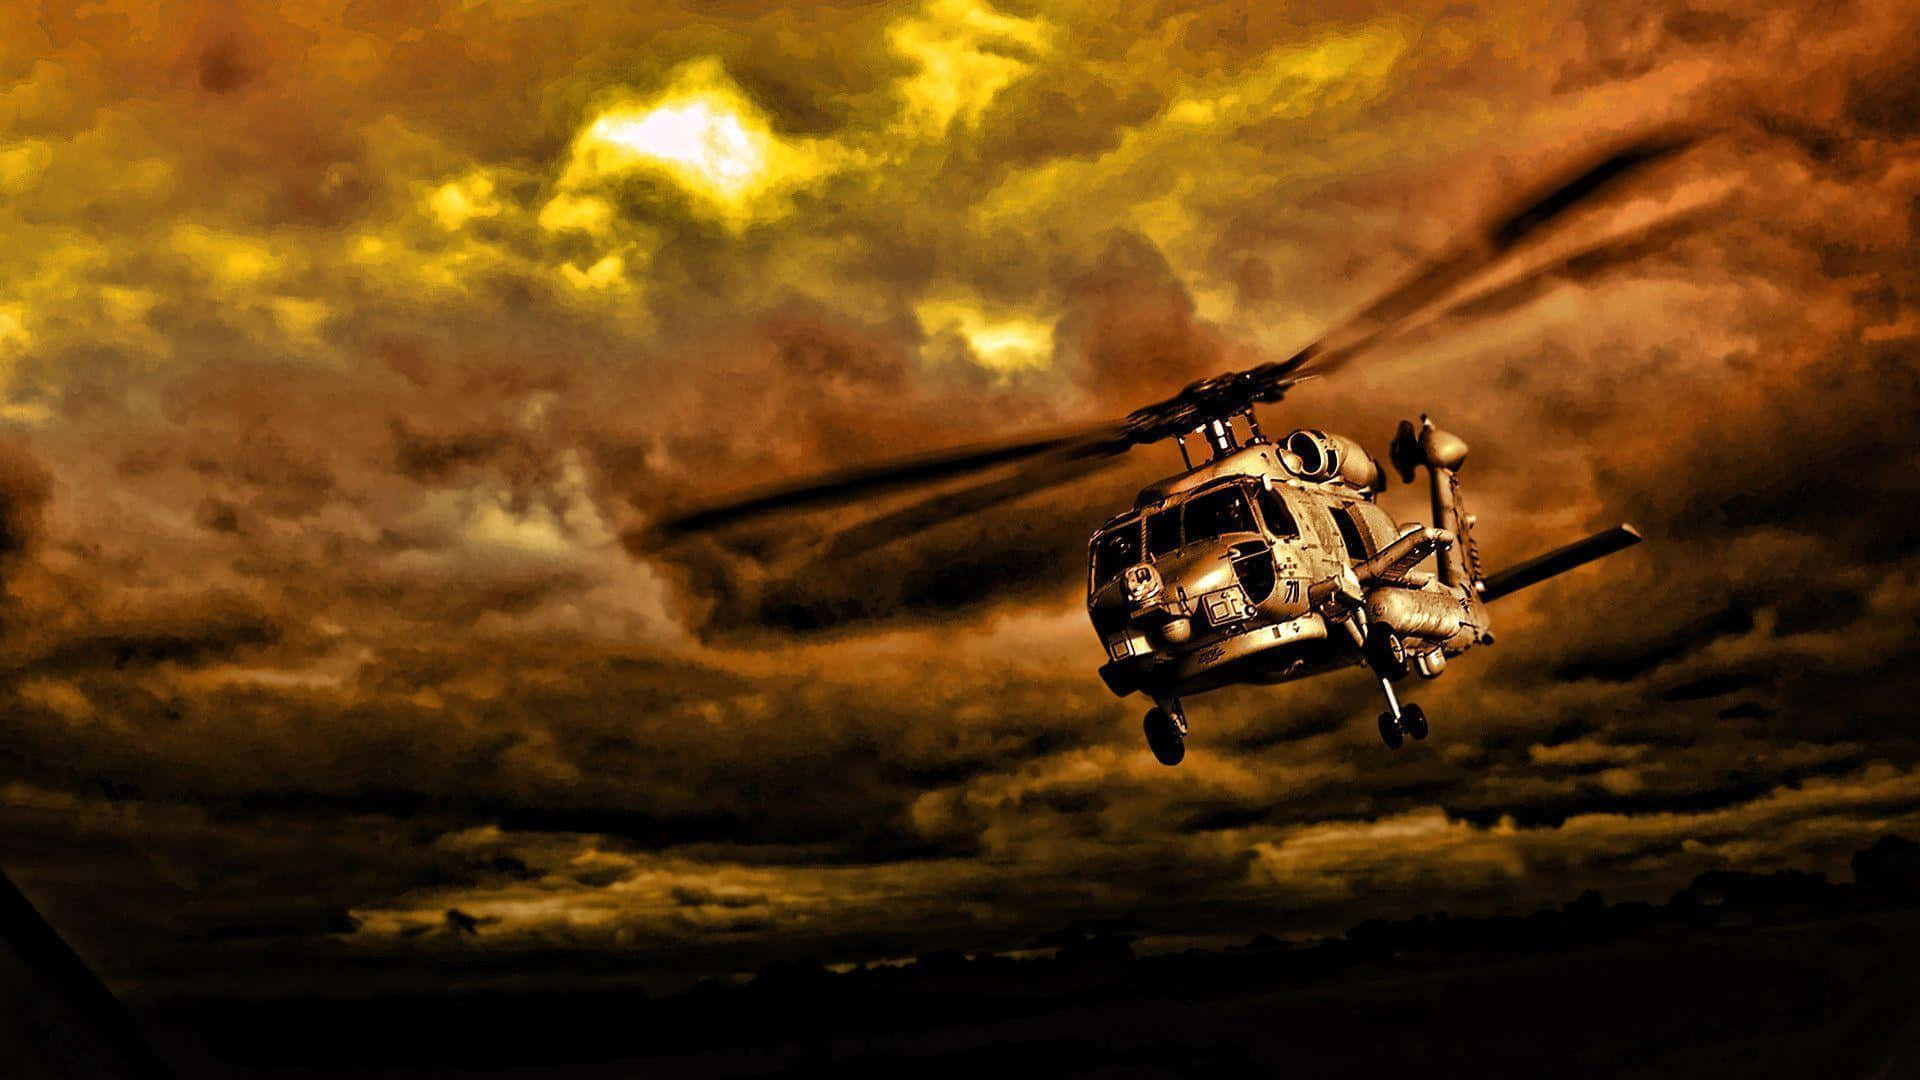 Sikorsky Sh-60 Seahawk Cool Helicopter Wallpaper